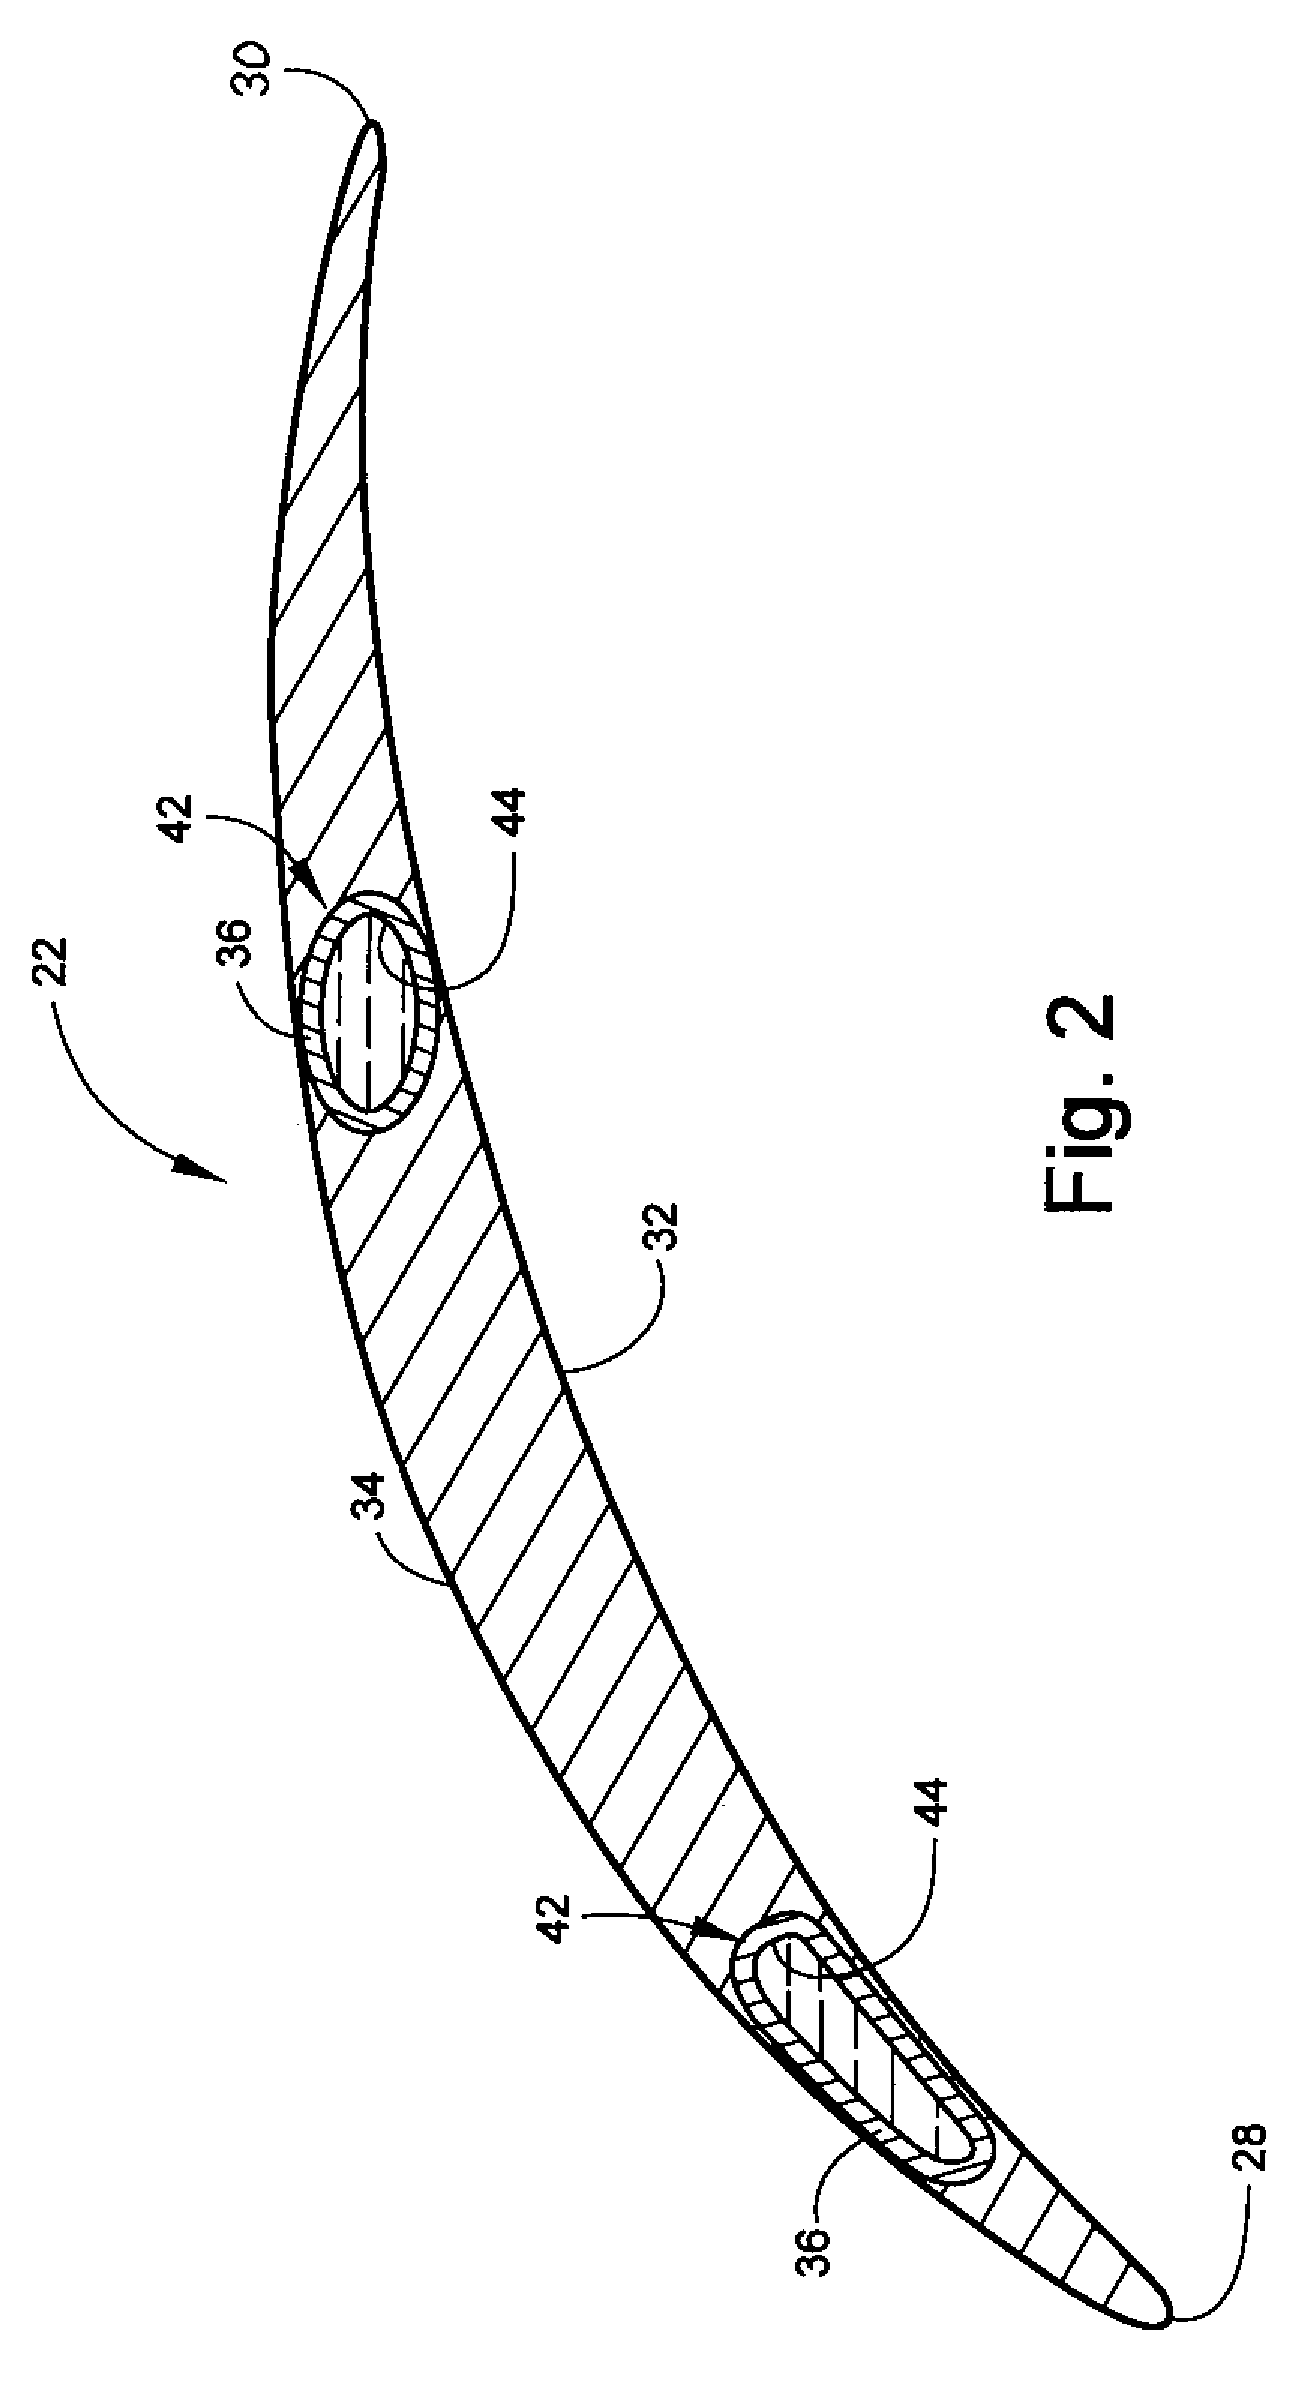 Heat transfer system and method for turbine engine using heat pipes